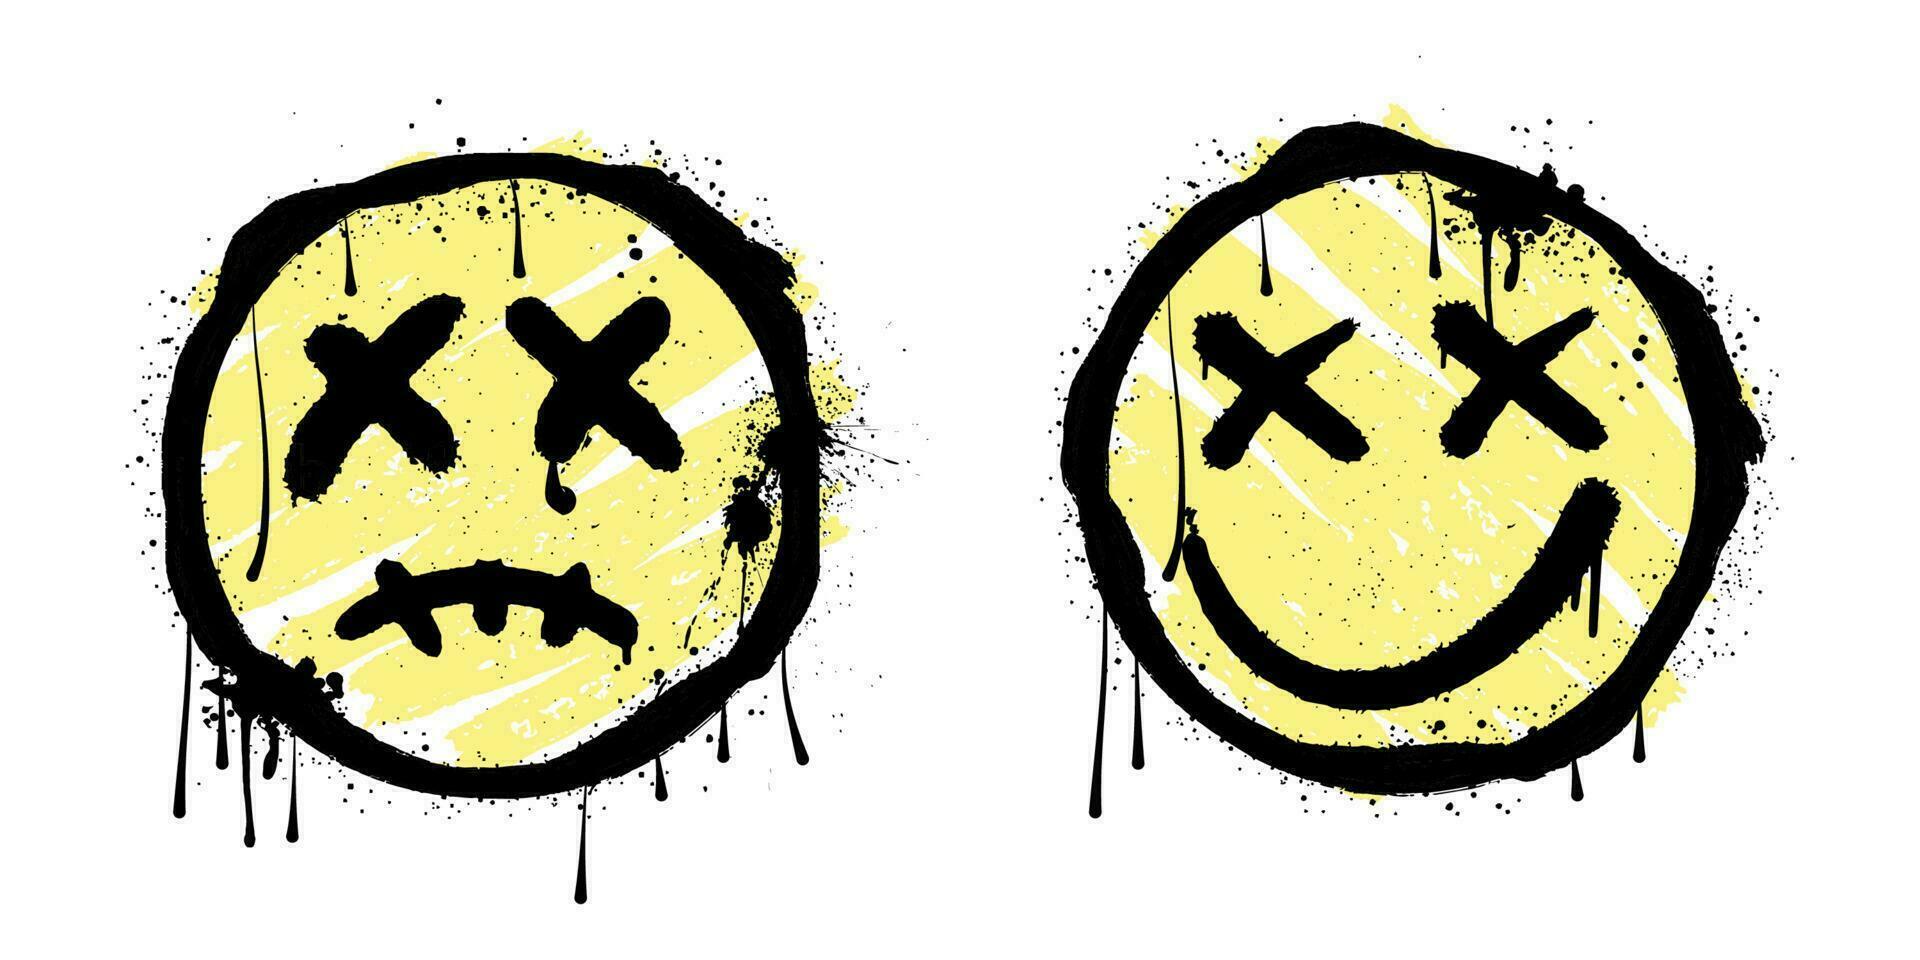 collection graffiti smile face illustration with dripping ink effects. Vector illustration